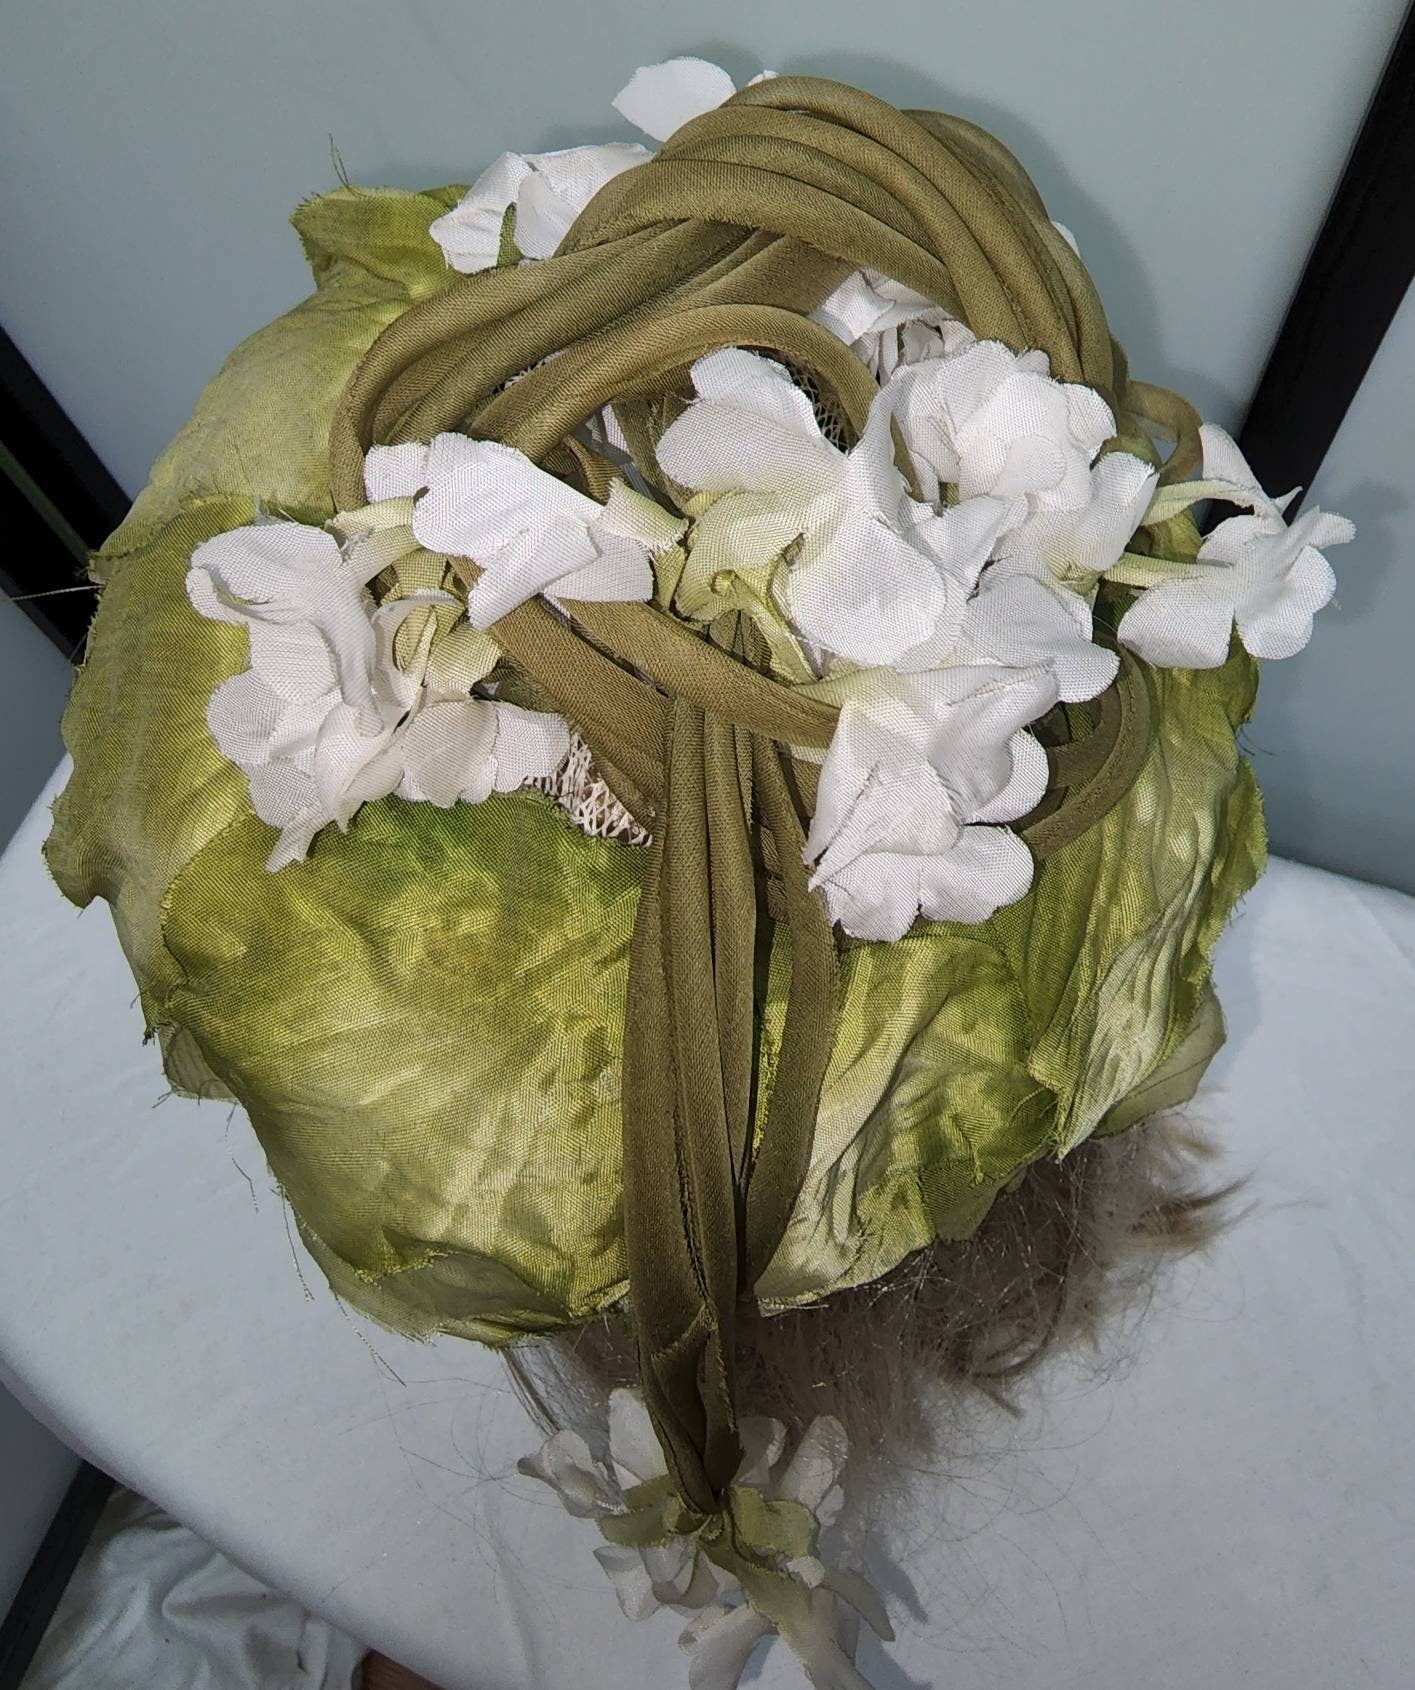 Vintage Floral Hat 1950s Small Round Sculptural Hat Green Fabric Leaves Long Stems White Flowers Abstract Mid Century Rockabilly 20.5 in.